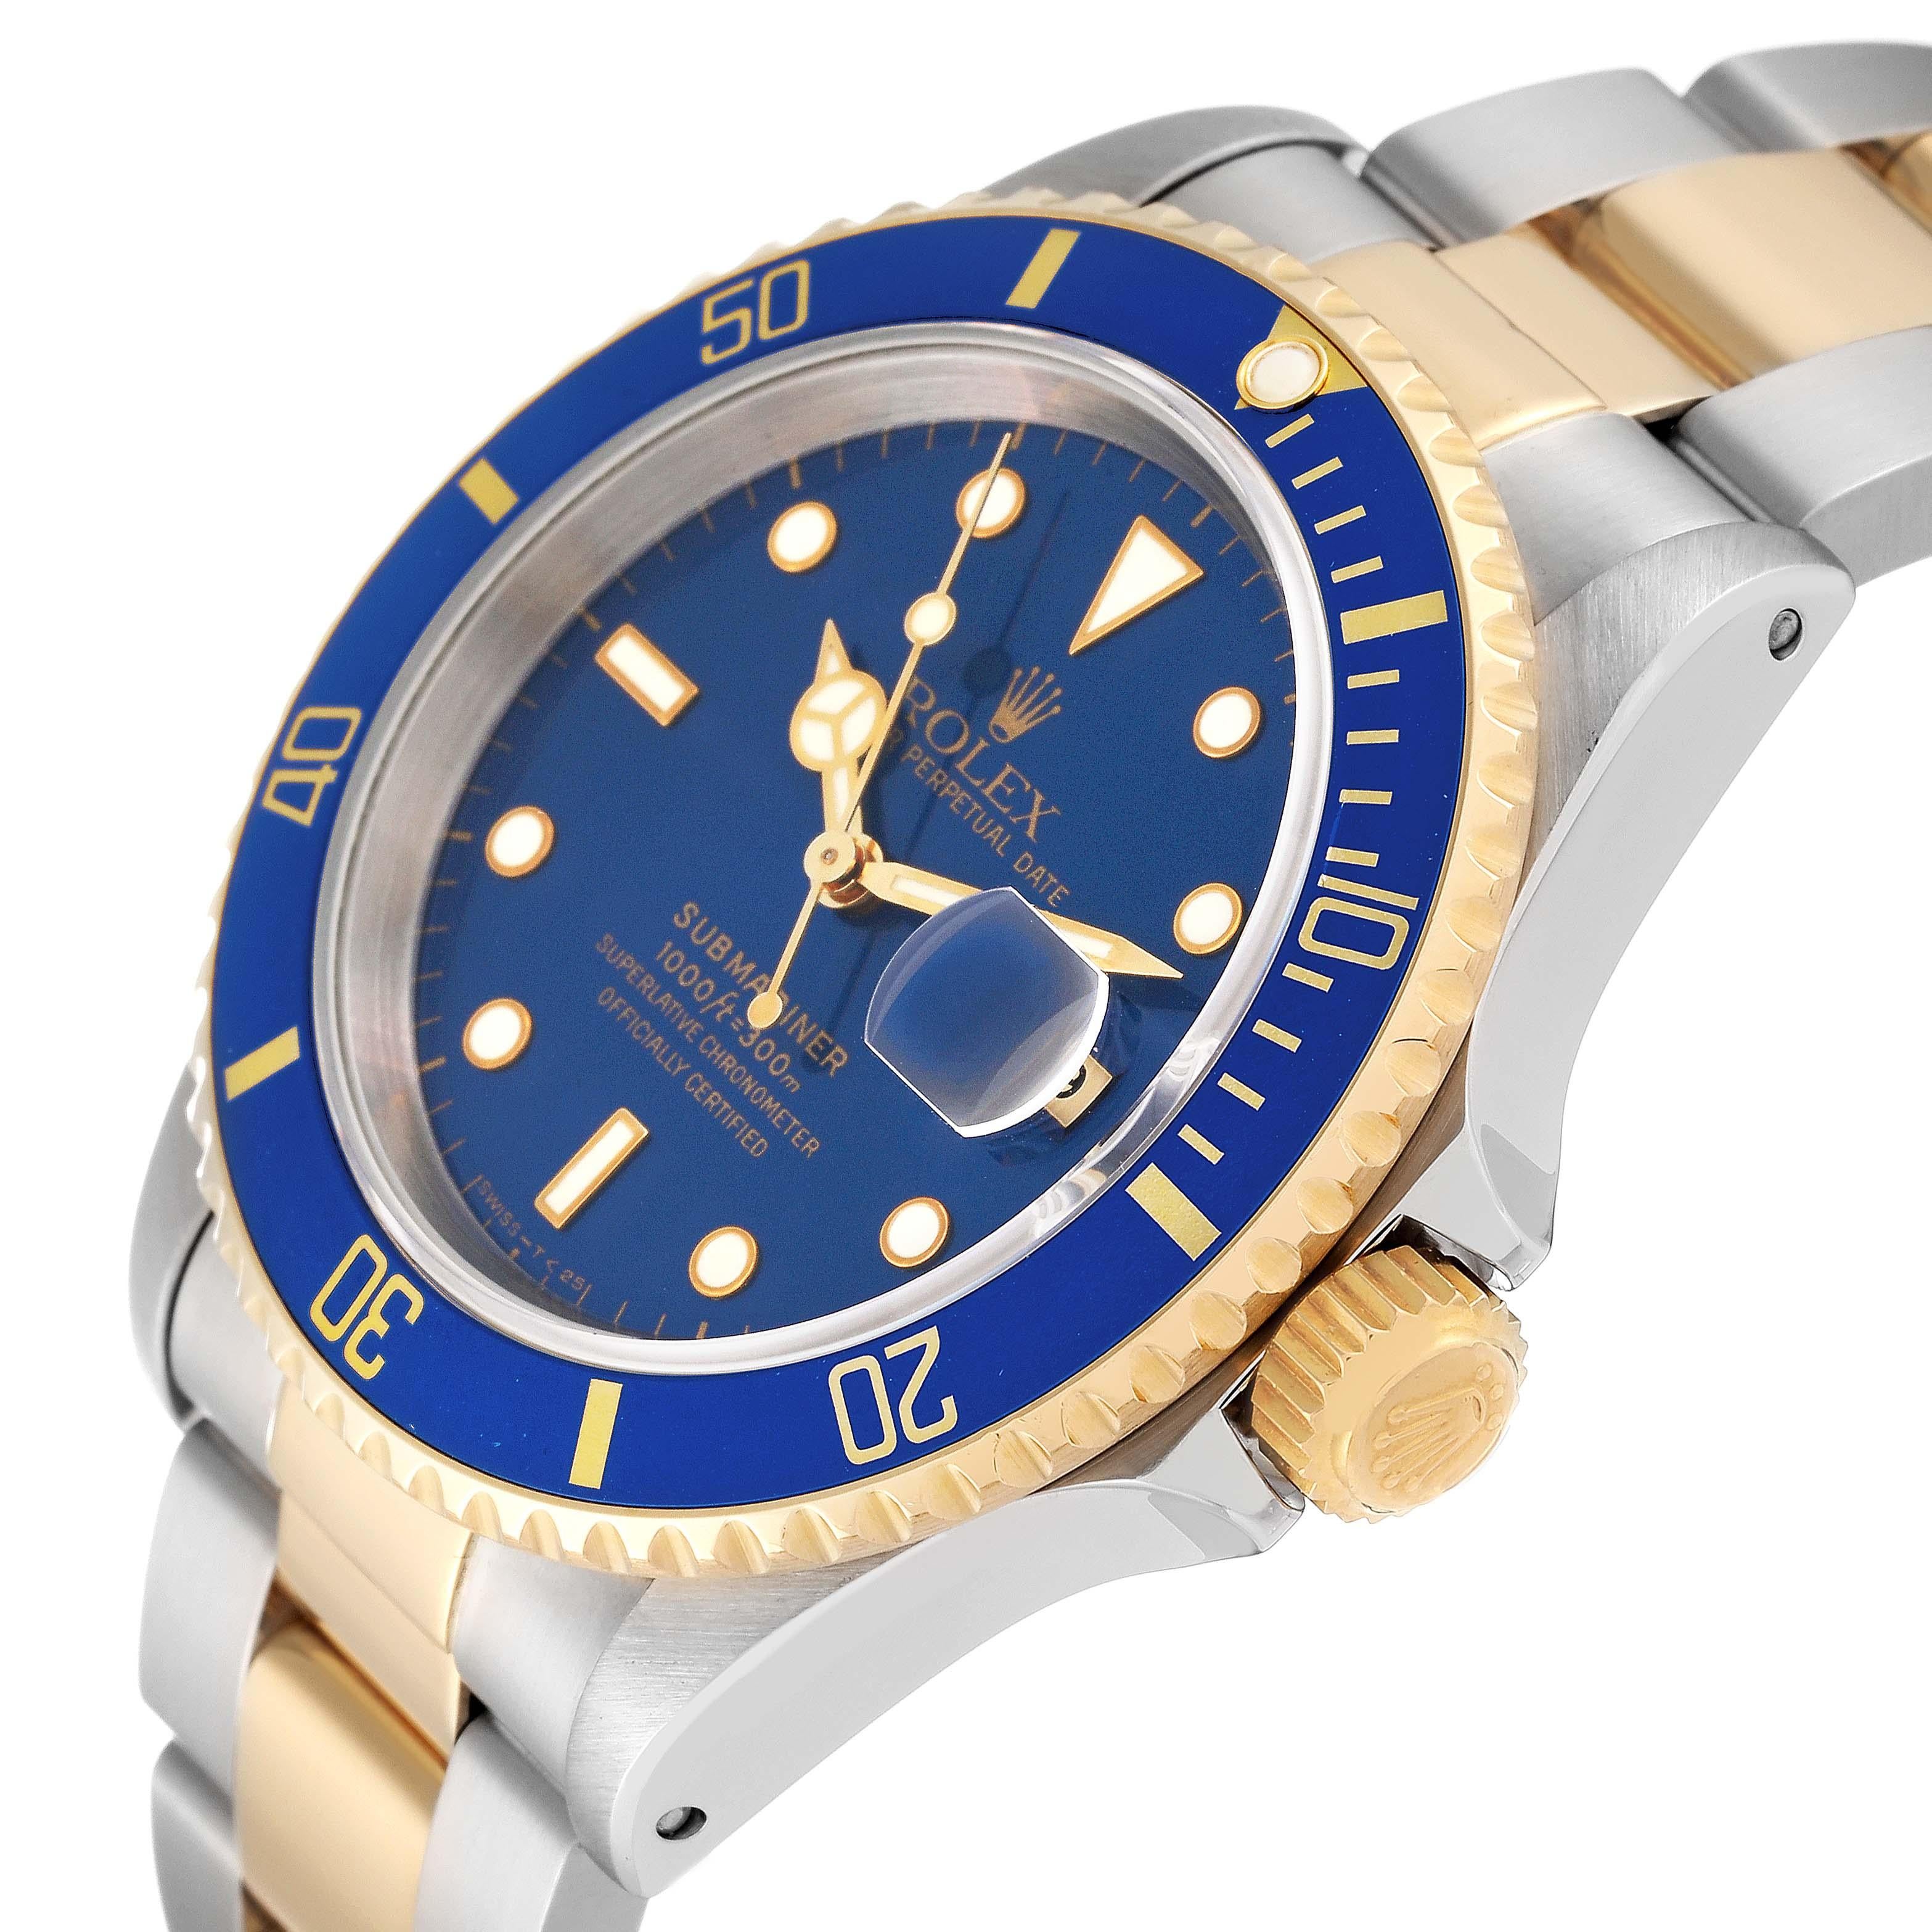 Rolex Submariner Blue Dial Steel Yellow Gold Mens Watch 16613 Box Papers 1